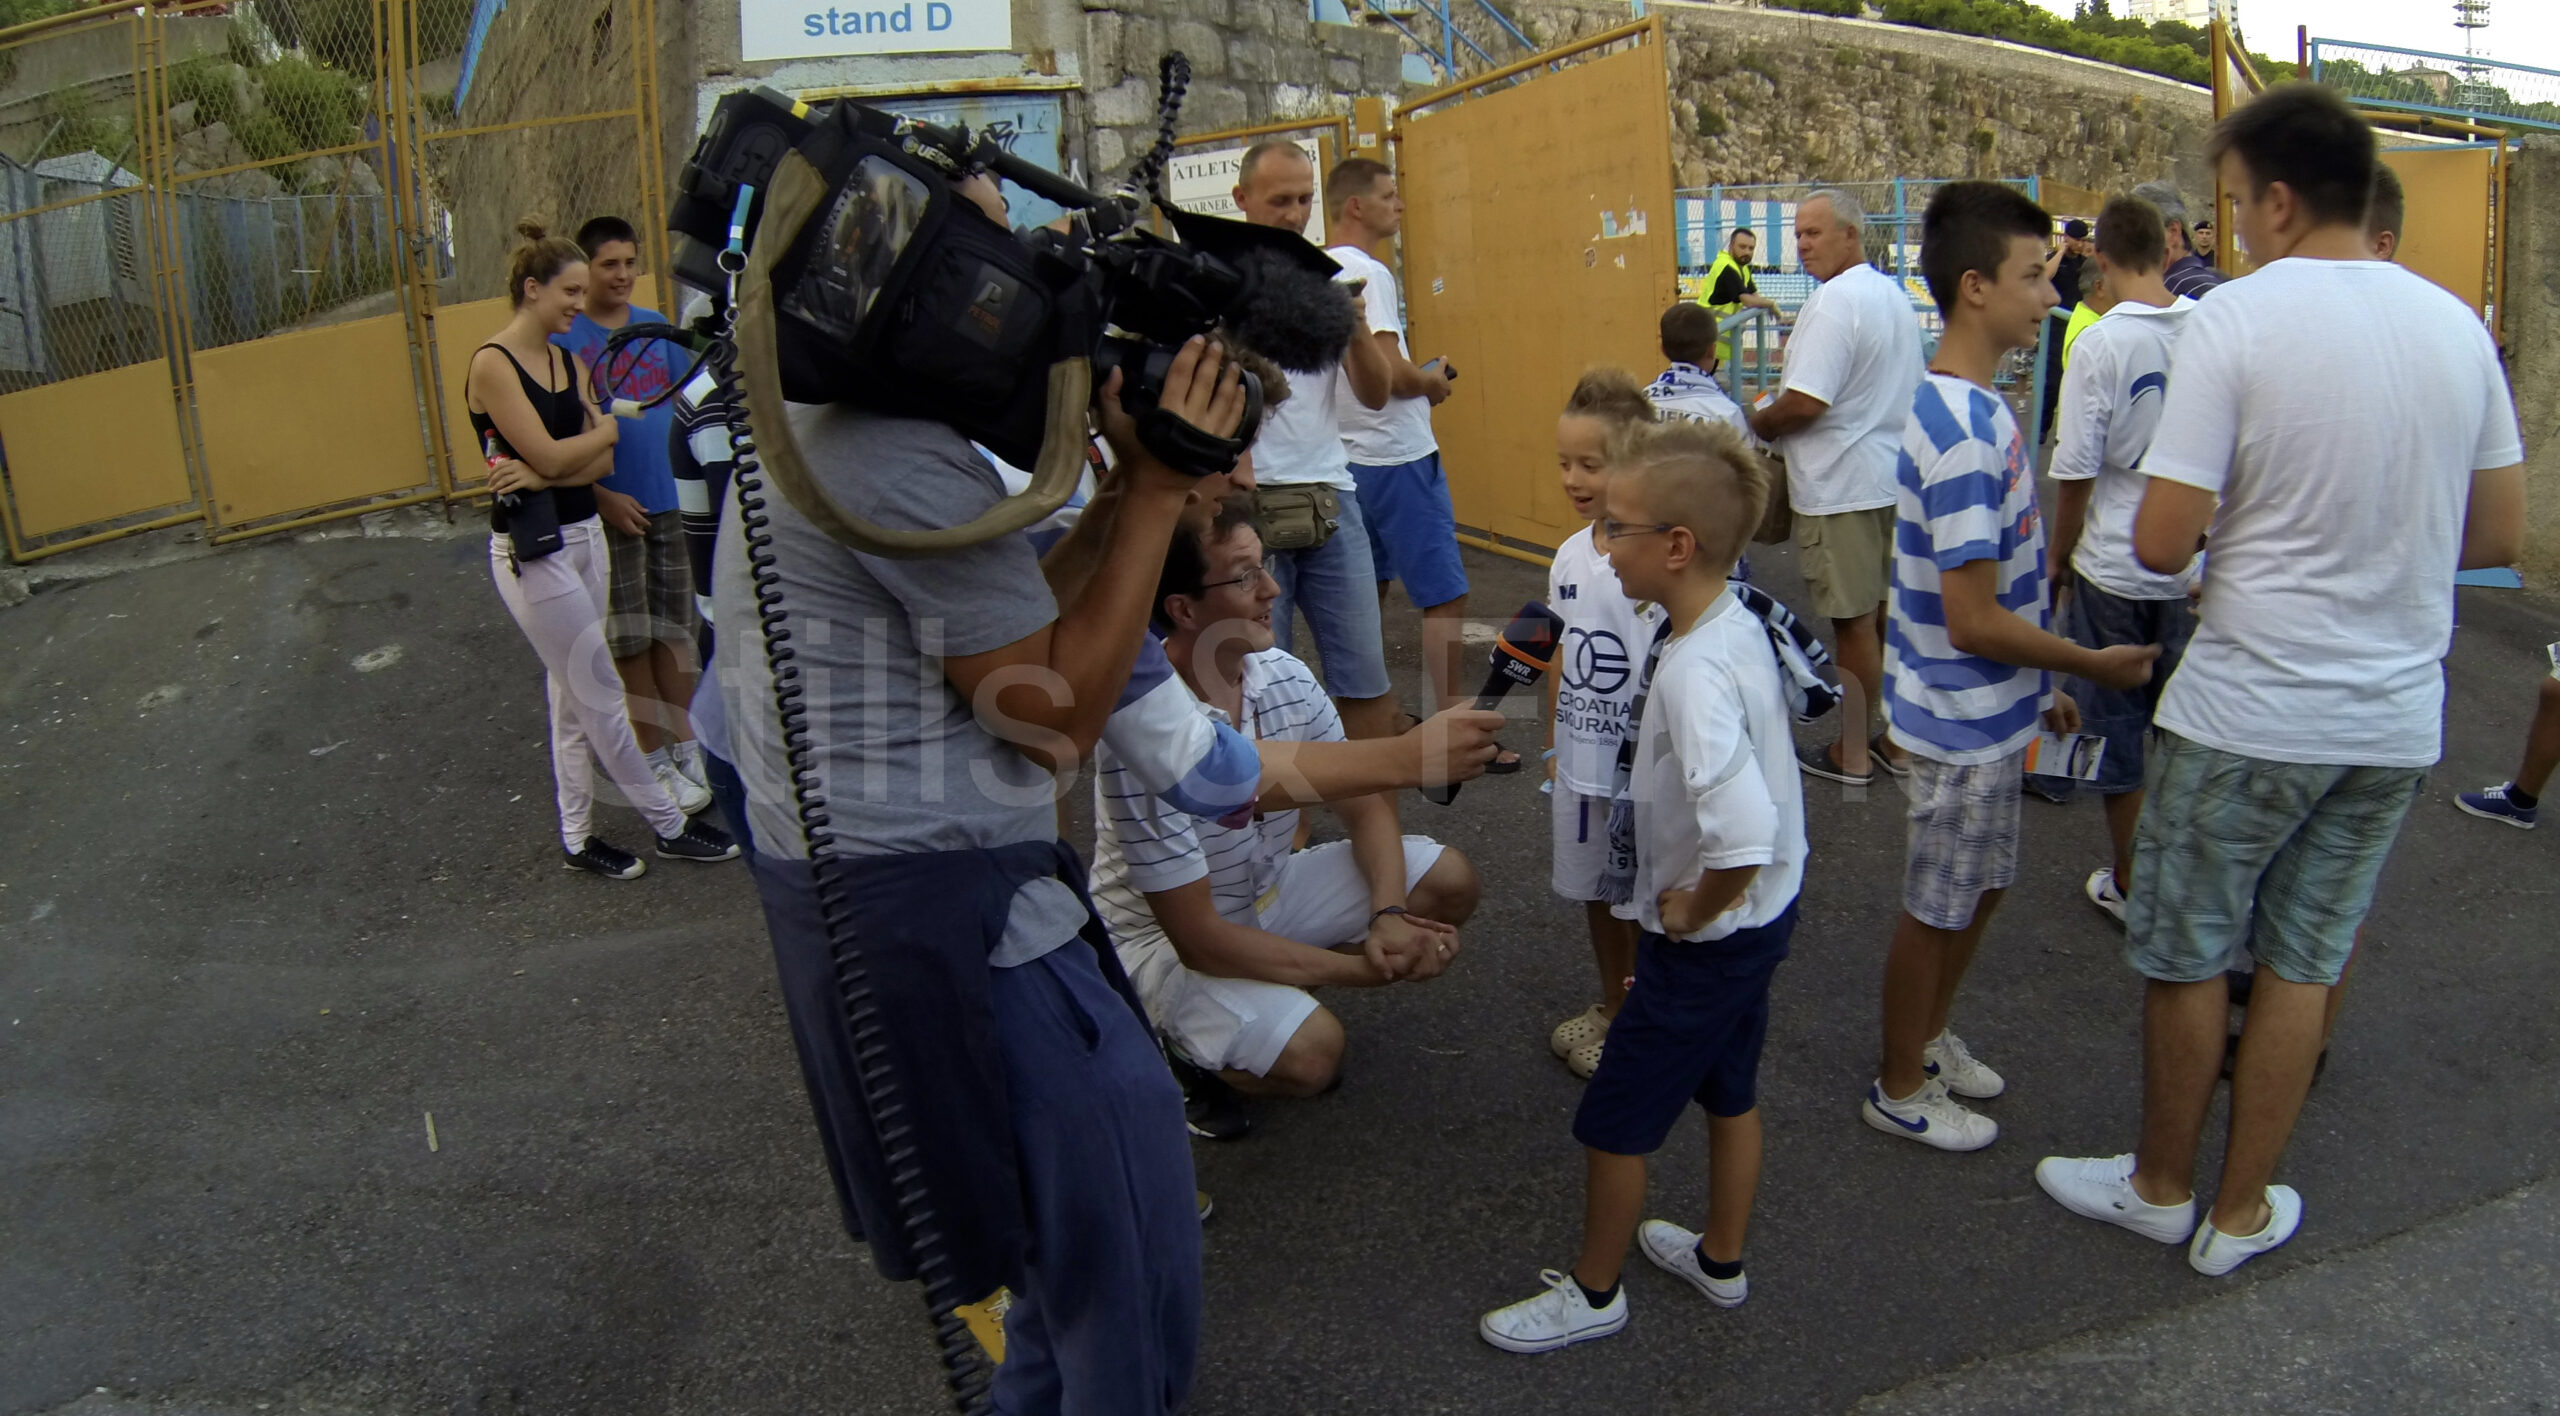 Camera crew from Zagreb films Rijeka football fans for a German client